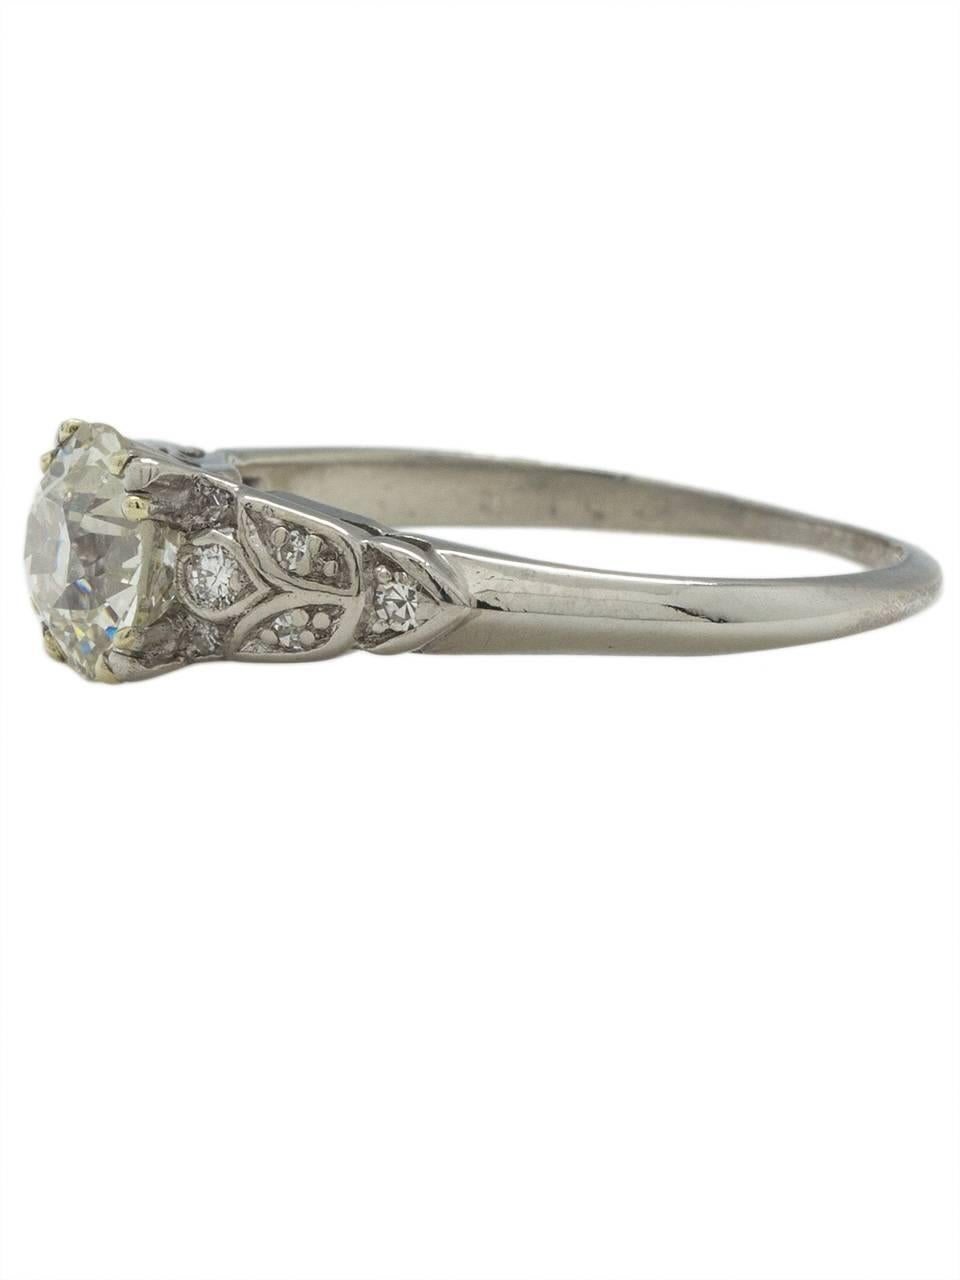 This gorgeous vintage engagement ring from the 1930s features a spectacularly cut EGL certified 1.22ct Old European Cut center diamond, I-VS2. Romantic floral motifs encompass 12 round side diamonds, with a total additional weight of approximately